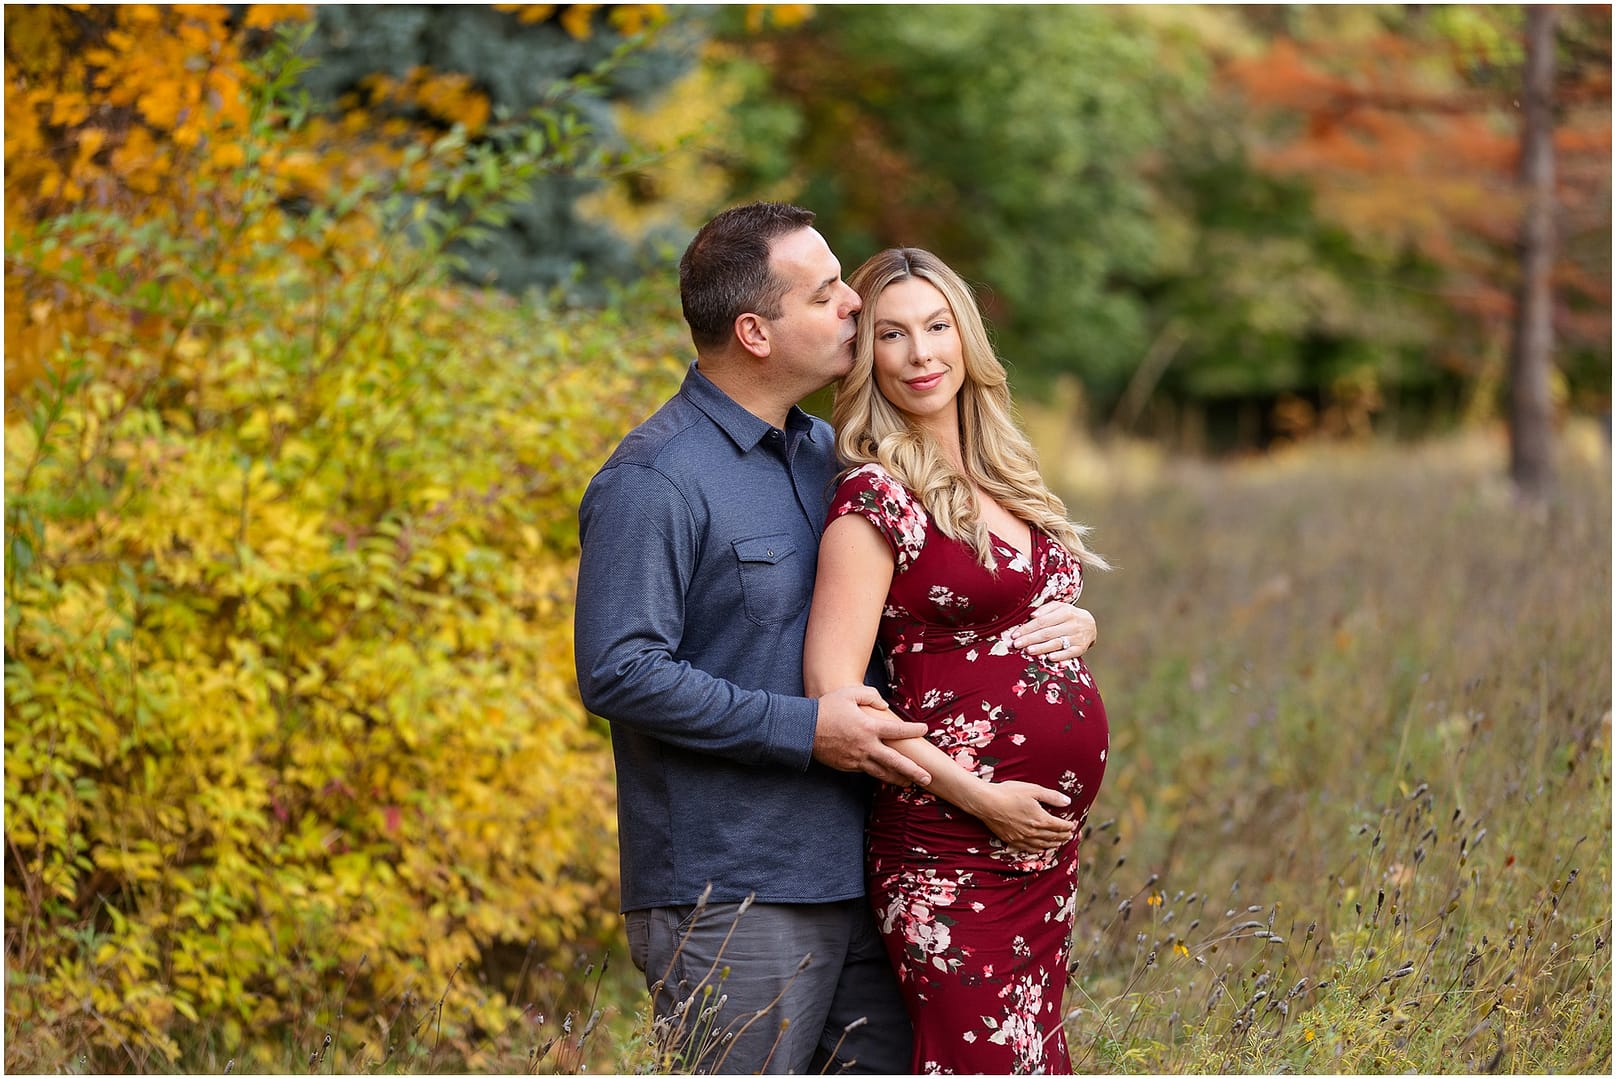 Dad kisses mom to be during Boise maternity shoot. Photo by Tiffany Hix Photography.